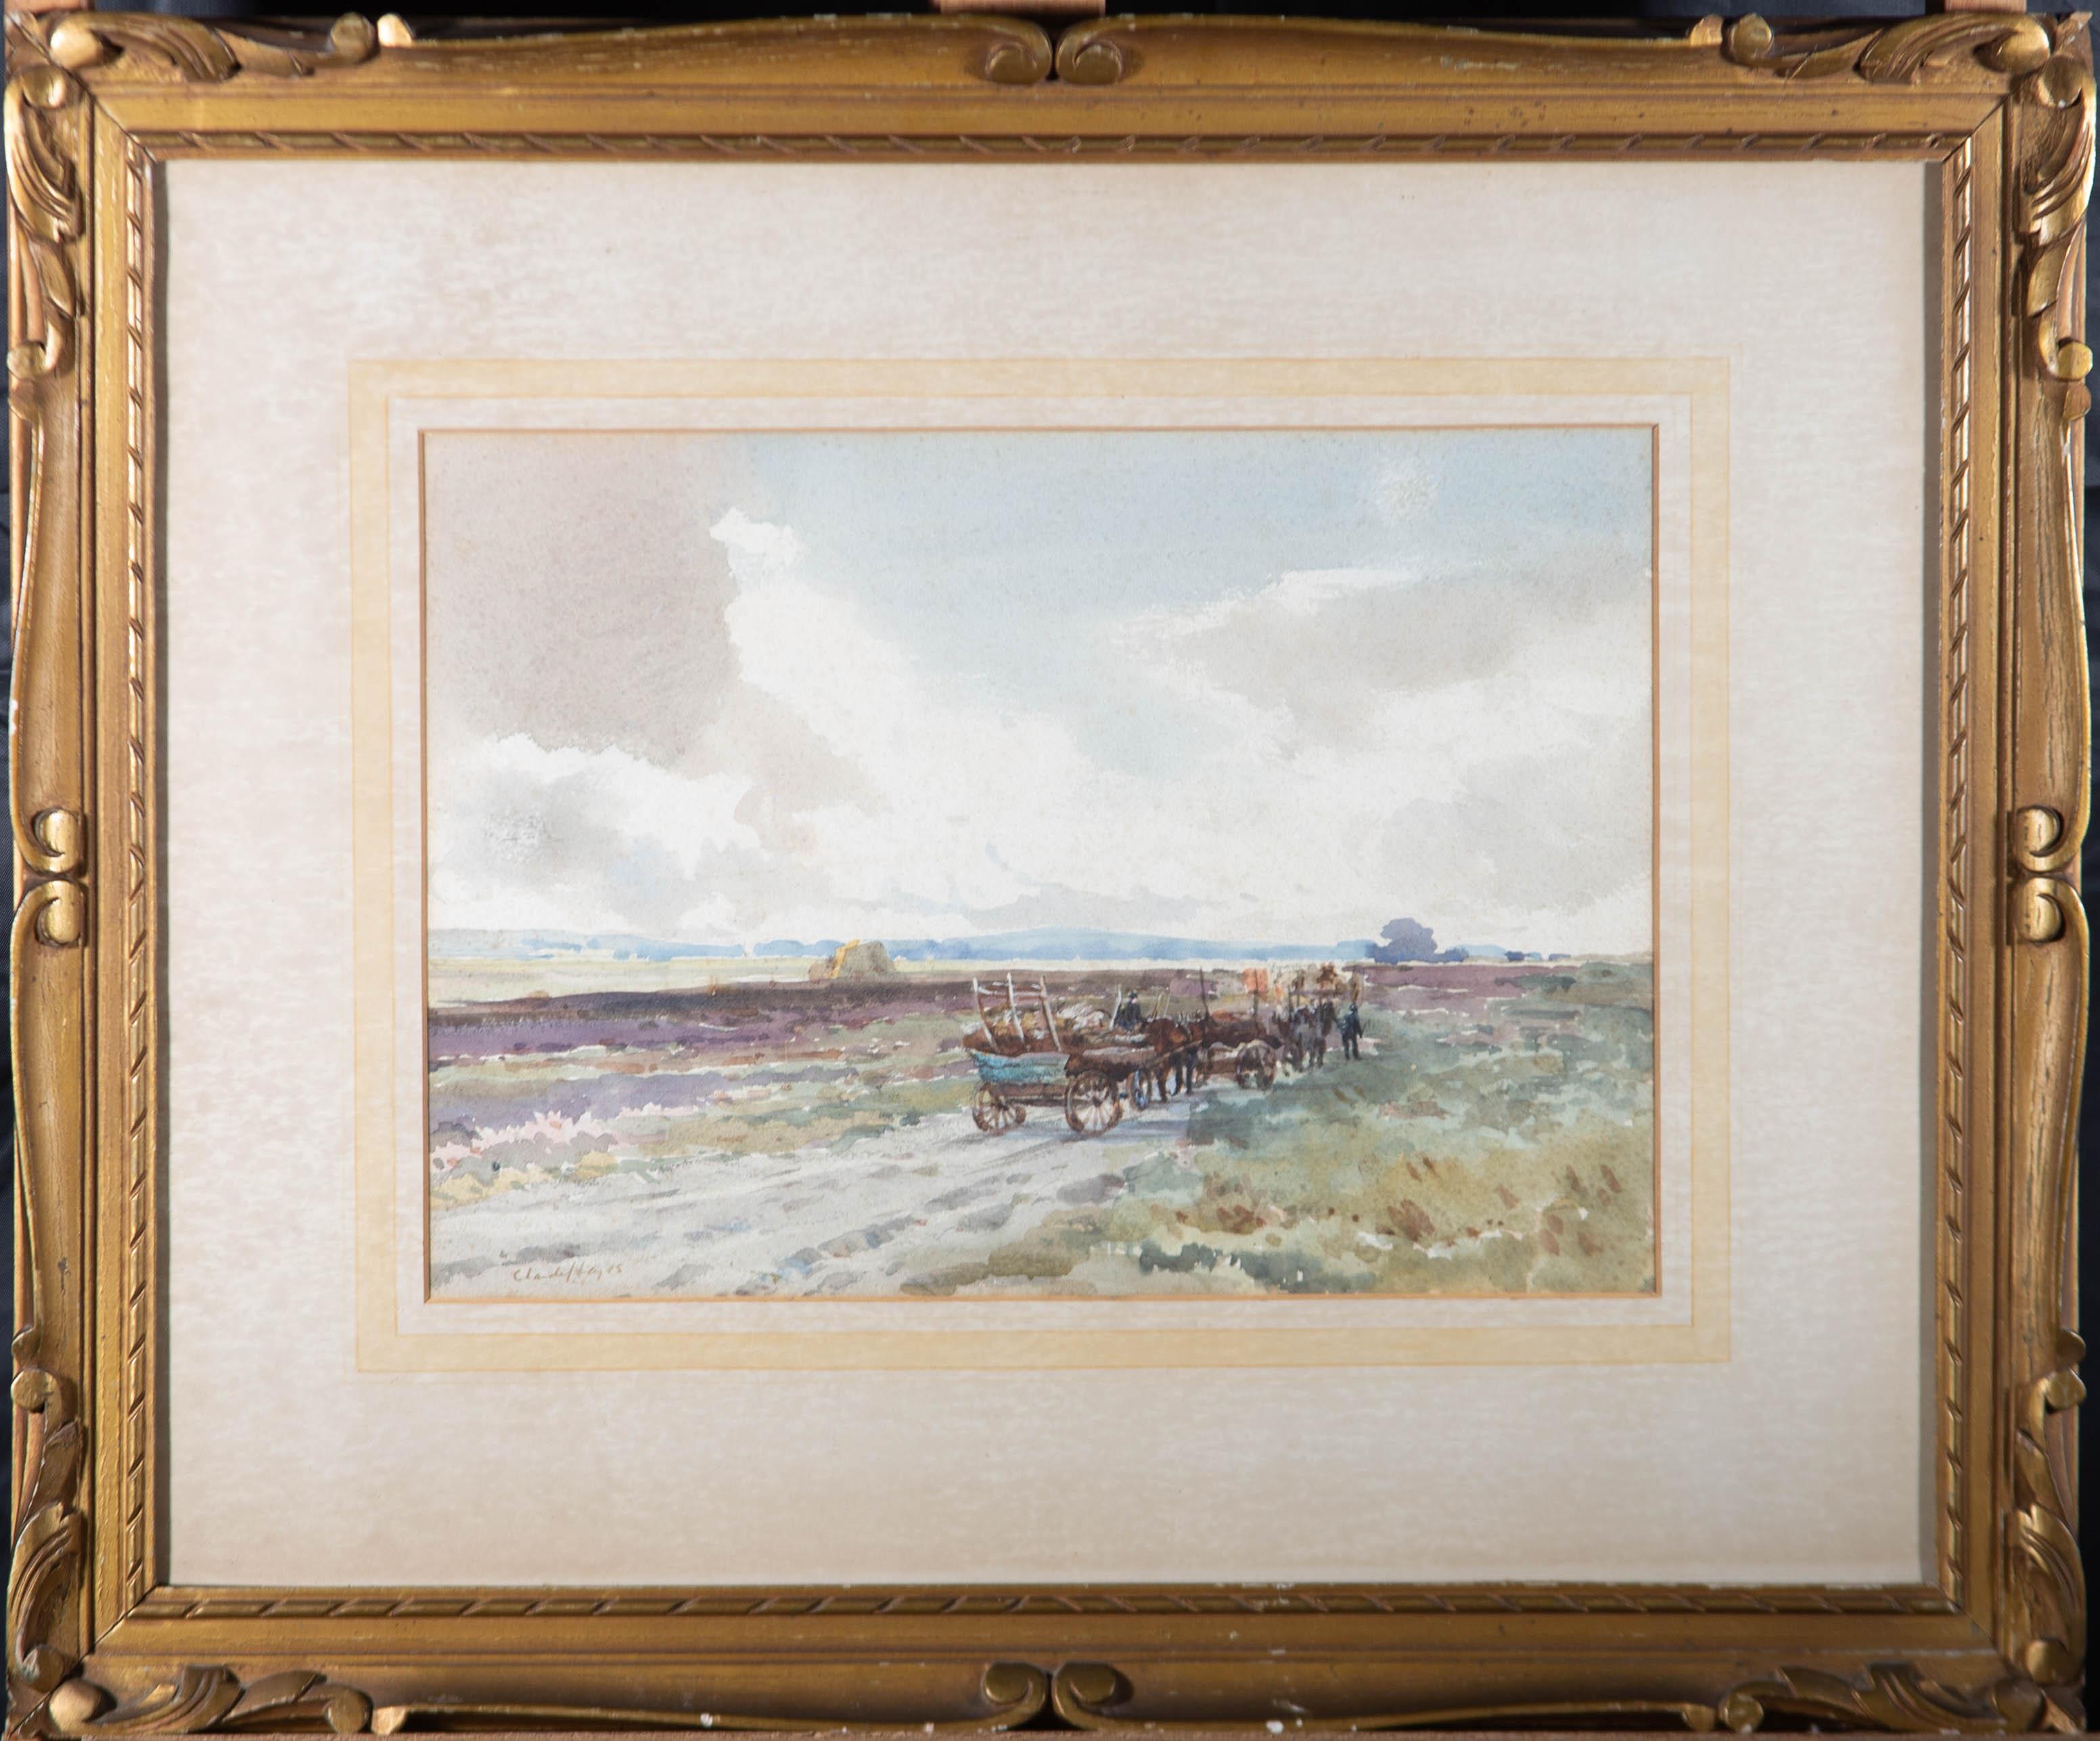 Unknown Landscape Art - Claude Hayes RI, ROI (1852-1922) - Late 19th Century Watercolour, Horse And Cart